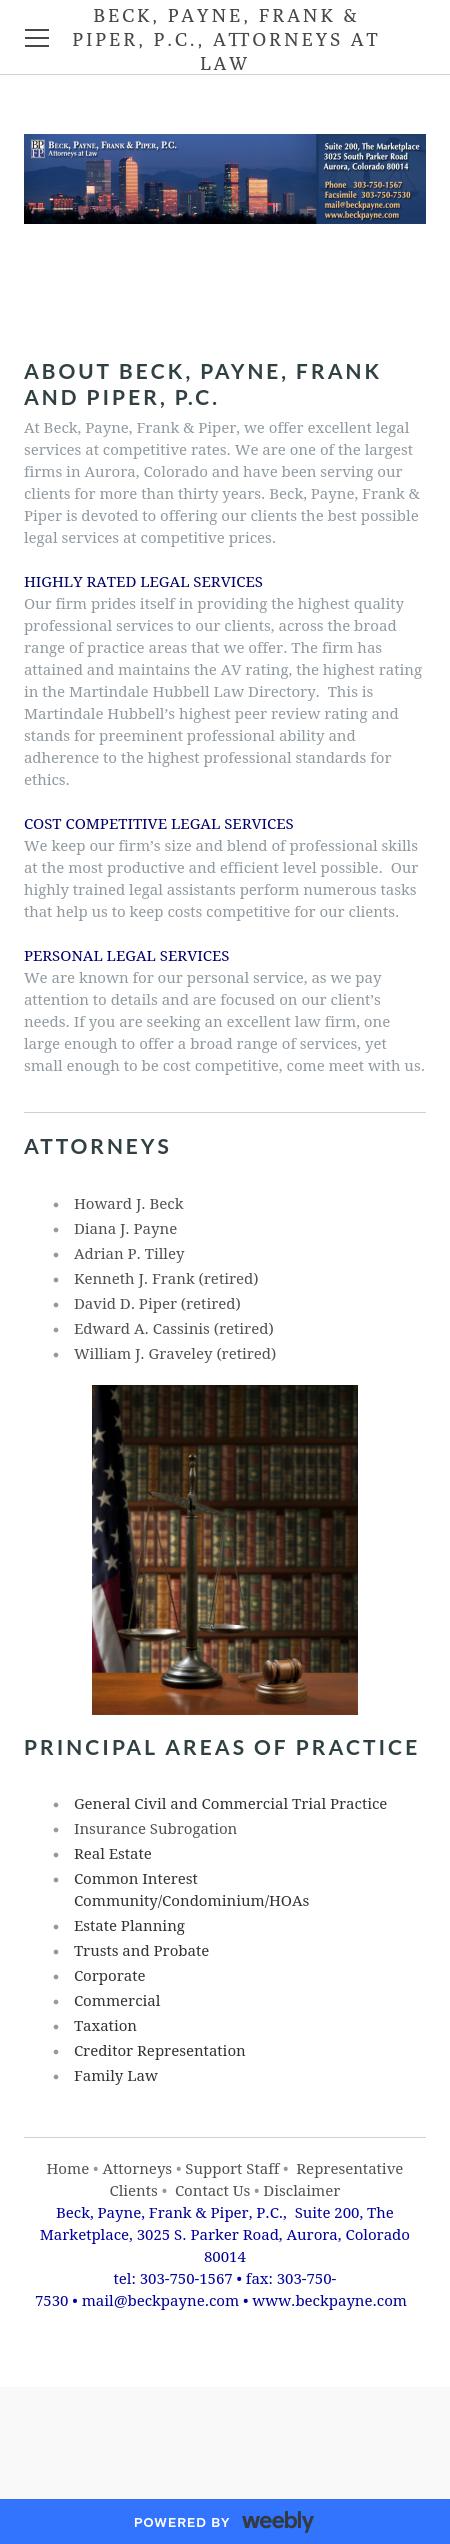 Beck, Payne, Frank & Piper, PC - Aurora CO Lawyers